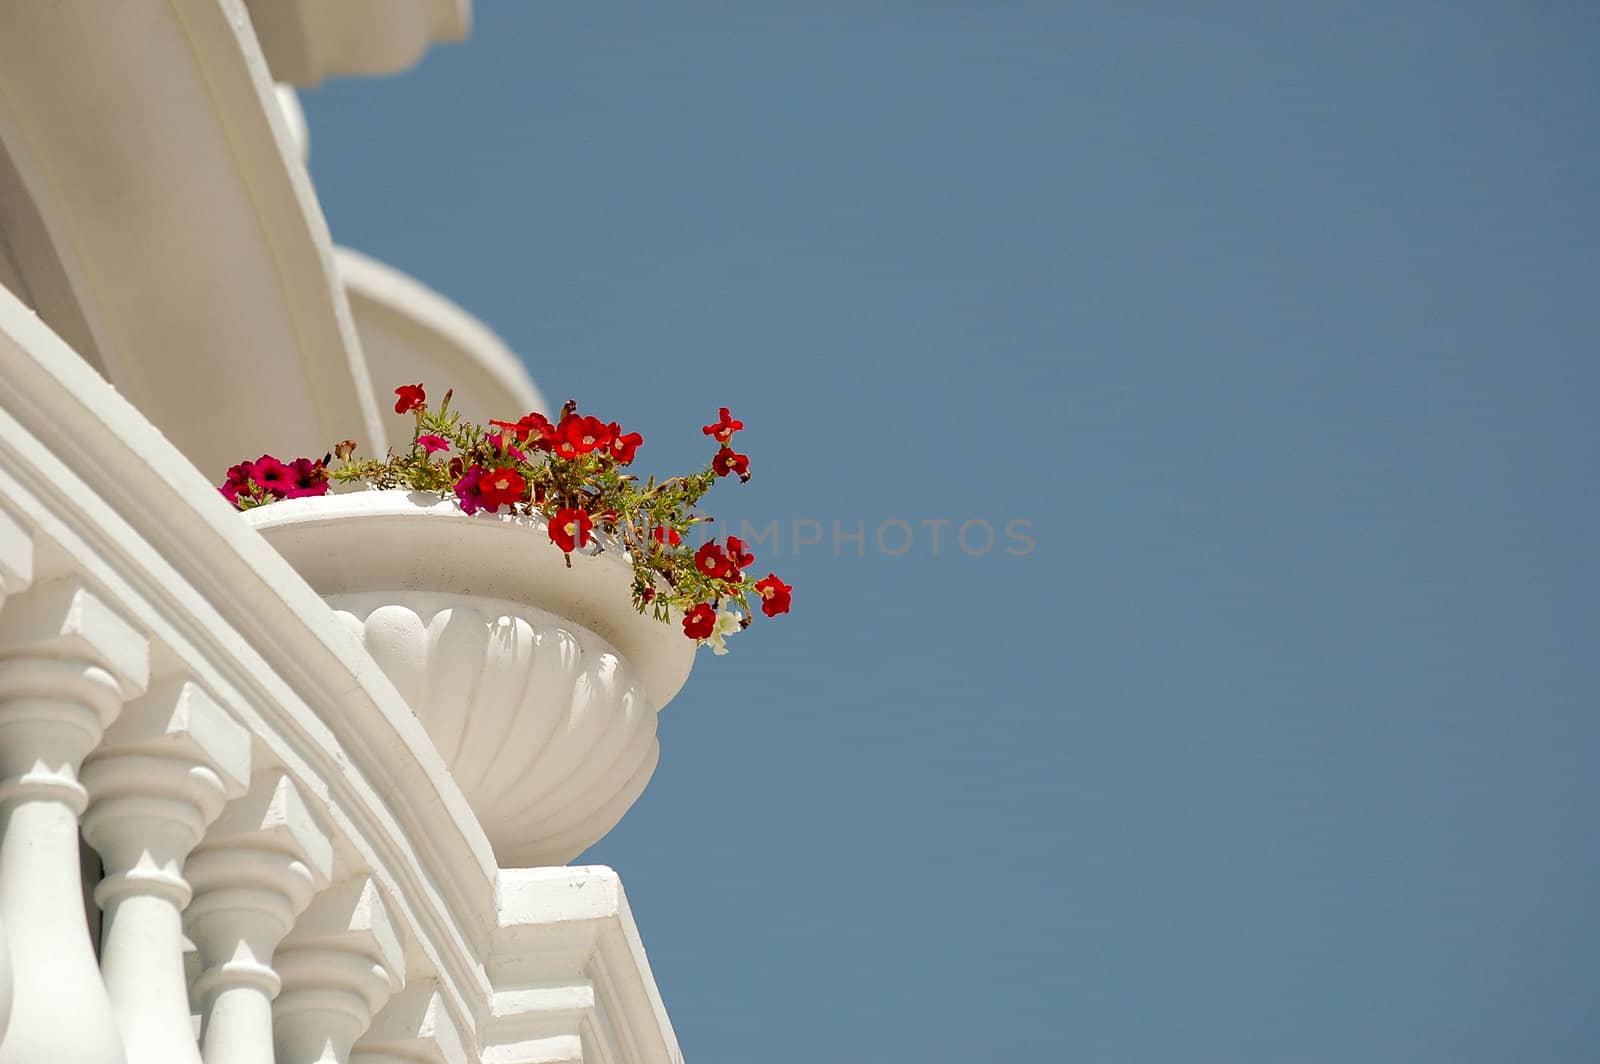 Flowers and balcony. Taken on a sunny day.